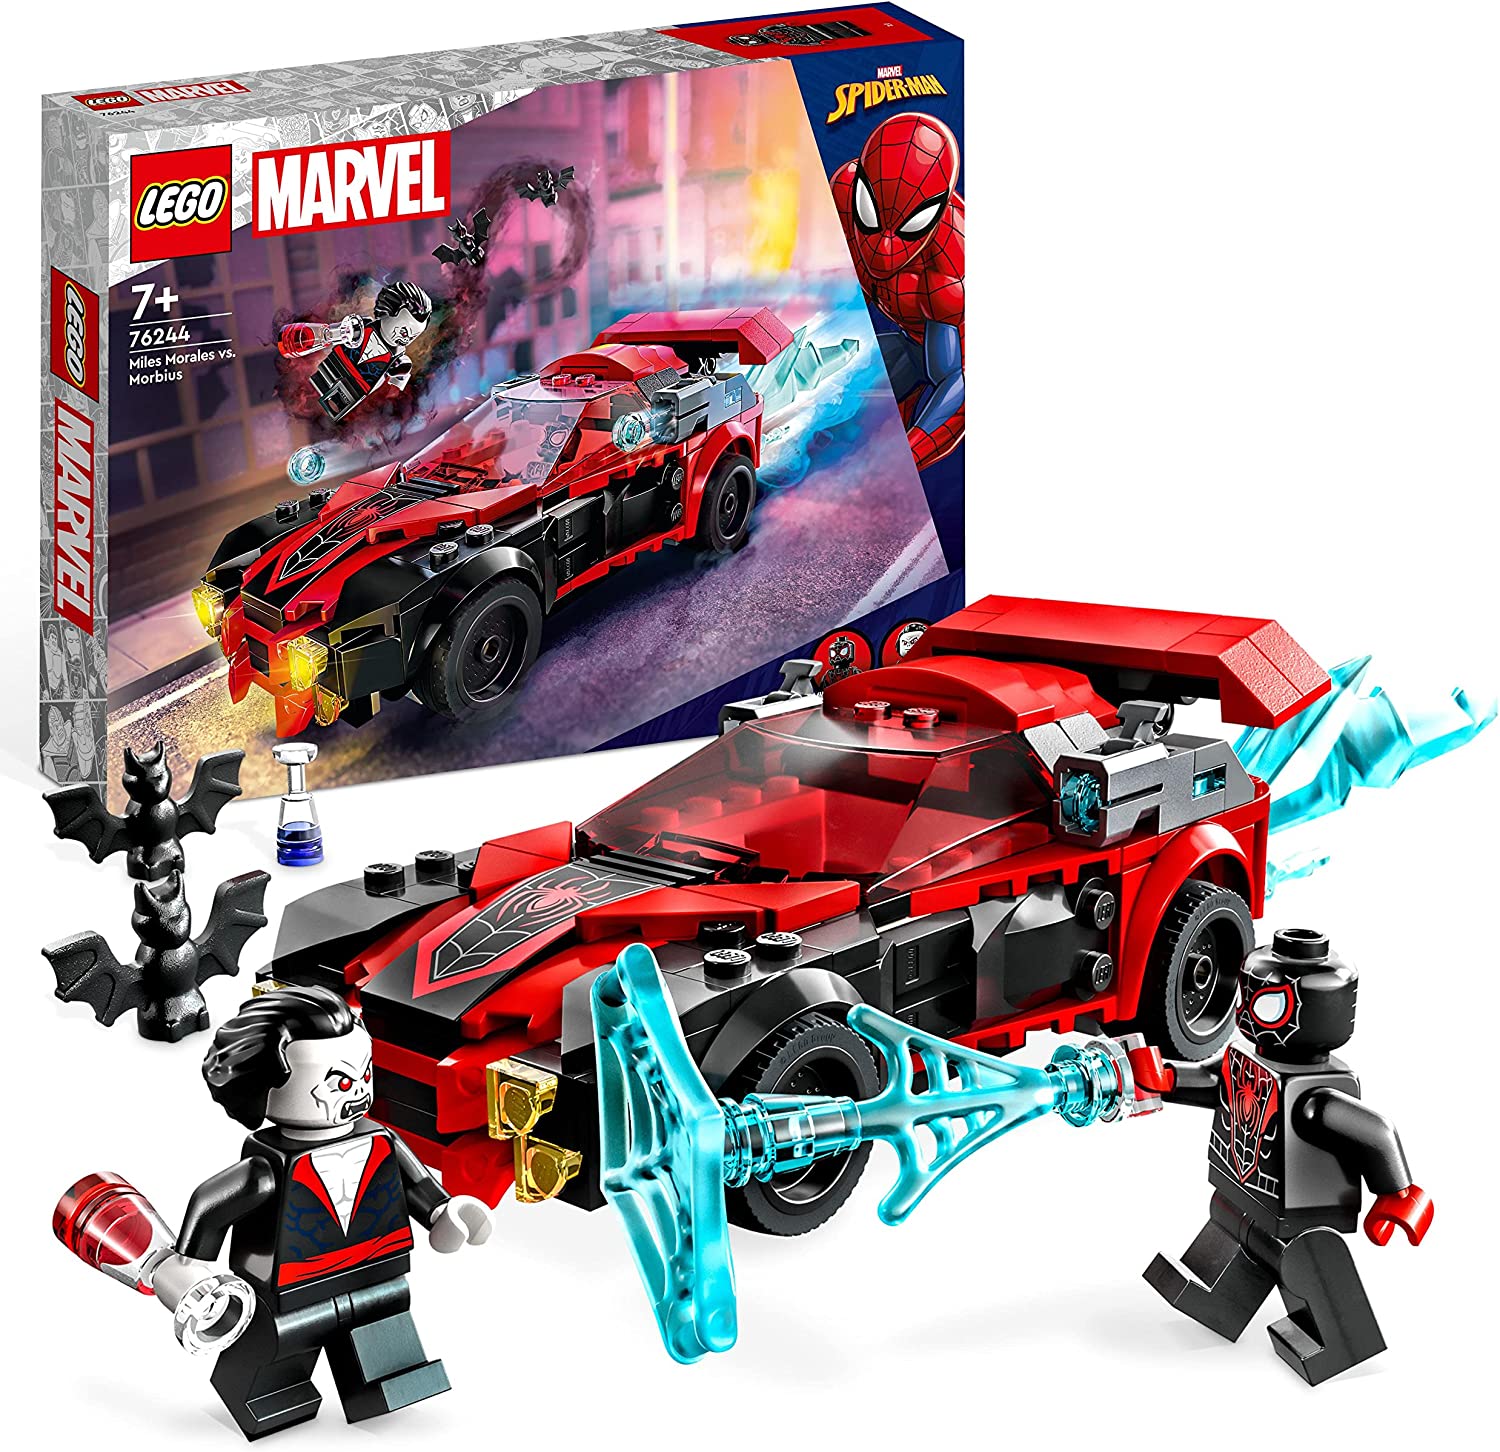 LEGO 76244 Marvel Miles Morales vs. Morbius Set, Spider-Man Racing Car Toy Car to Build from Adventures in the Spiderverse with Spidey Mini Figures